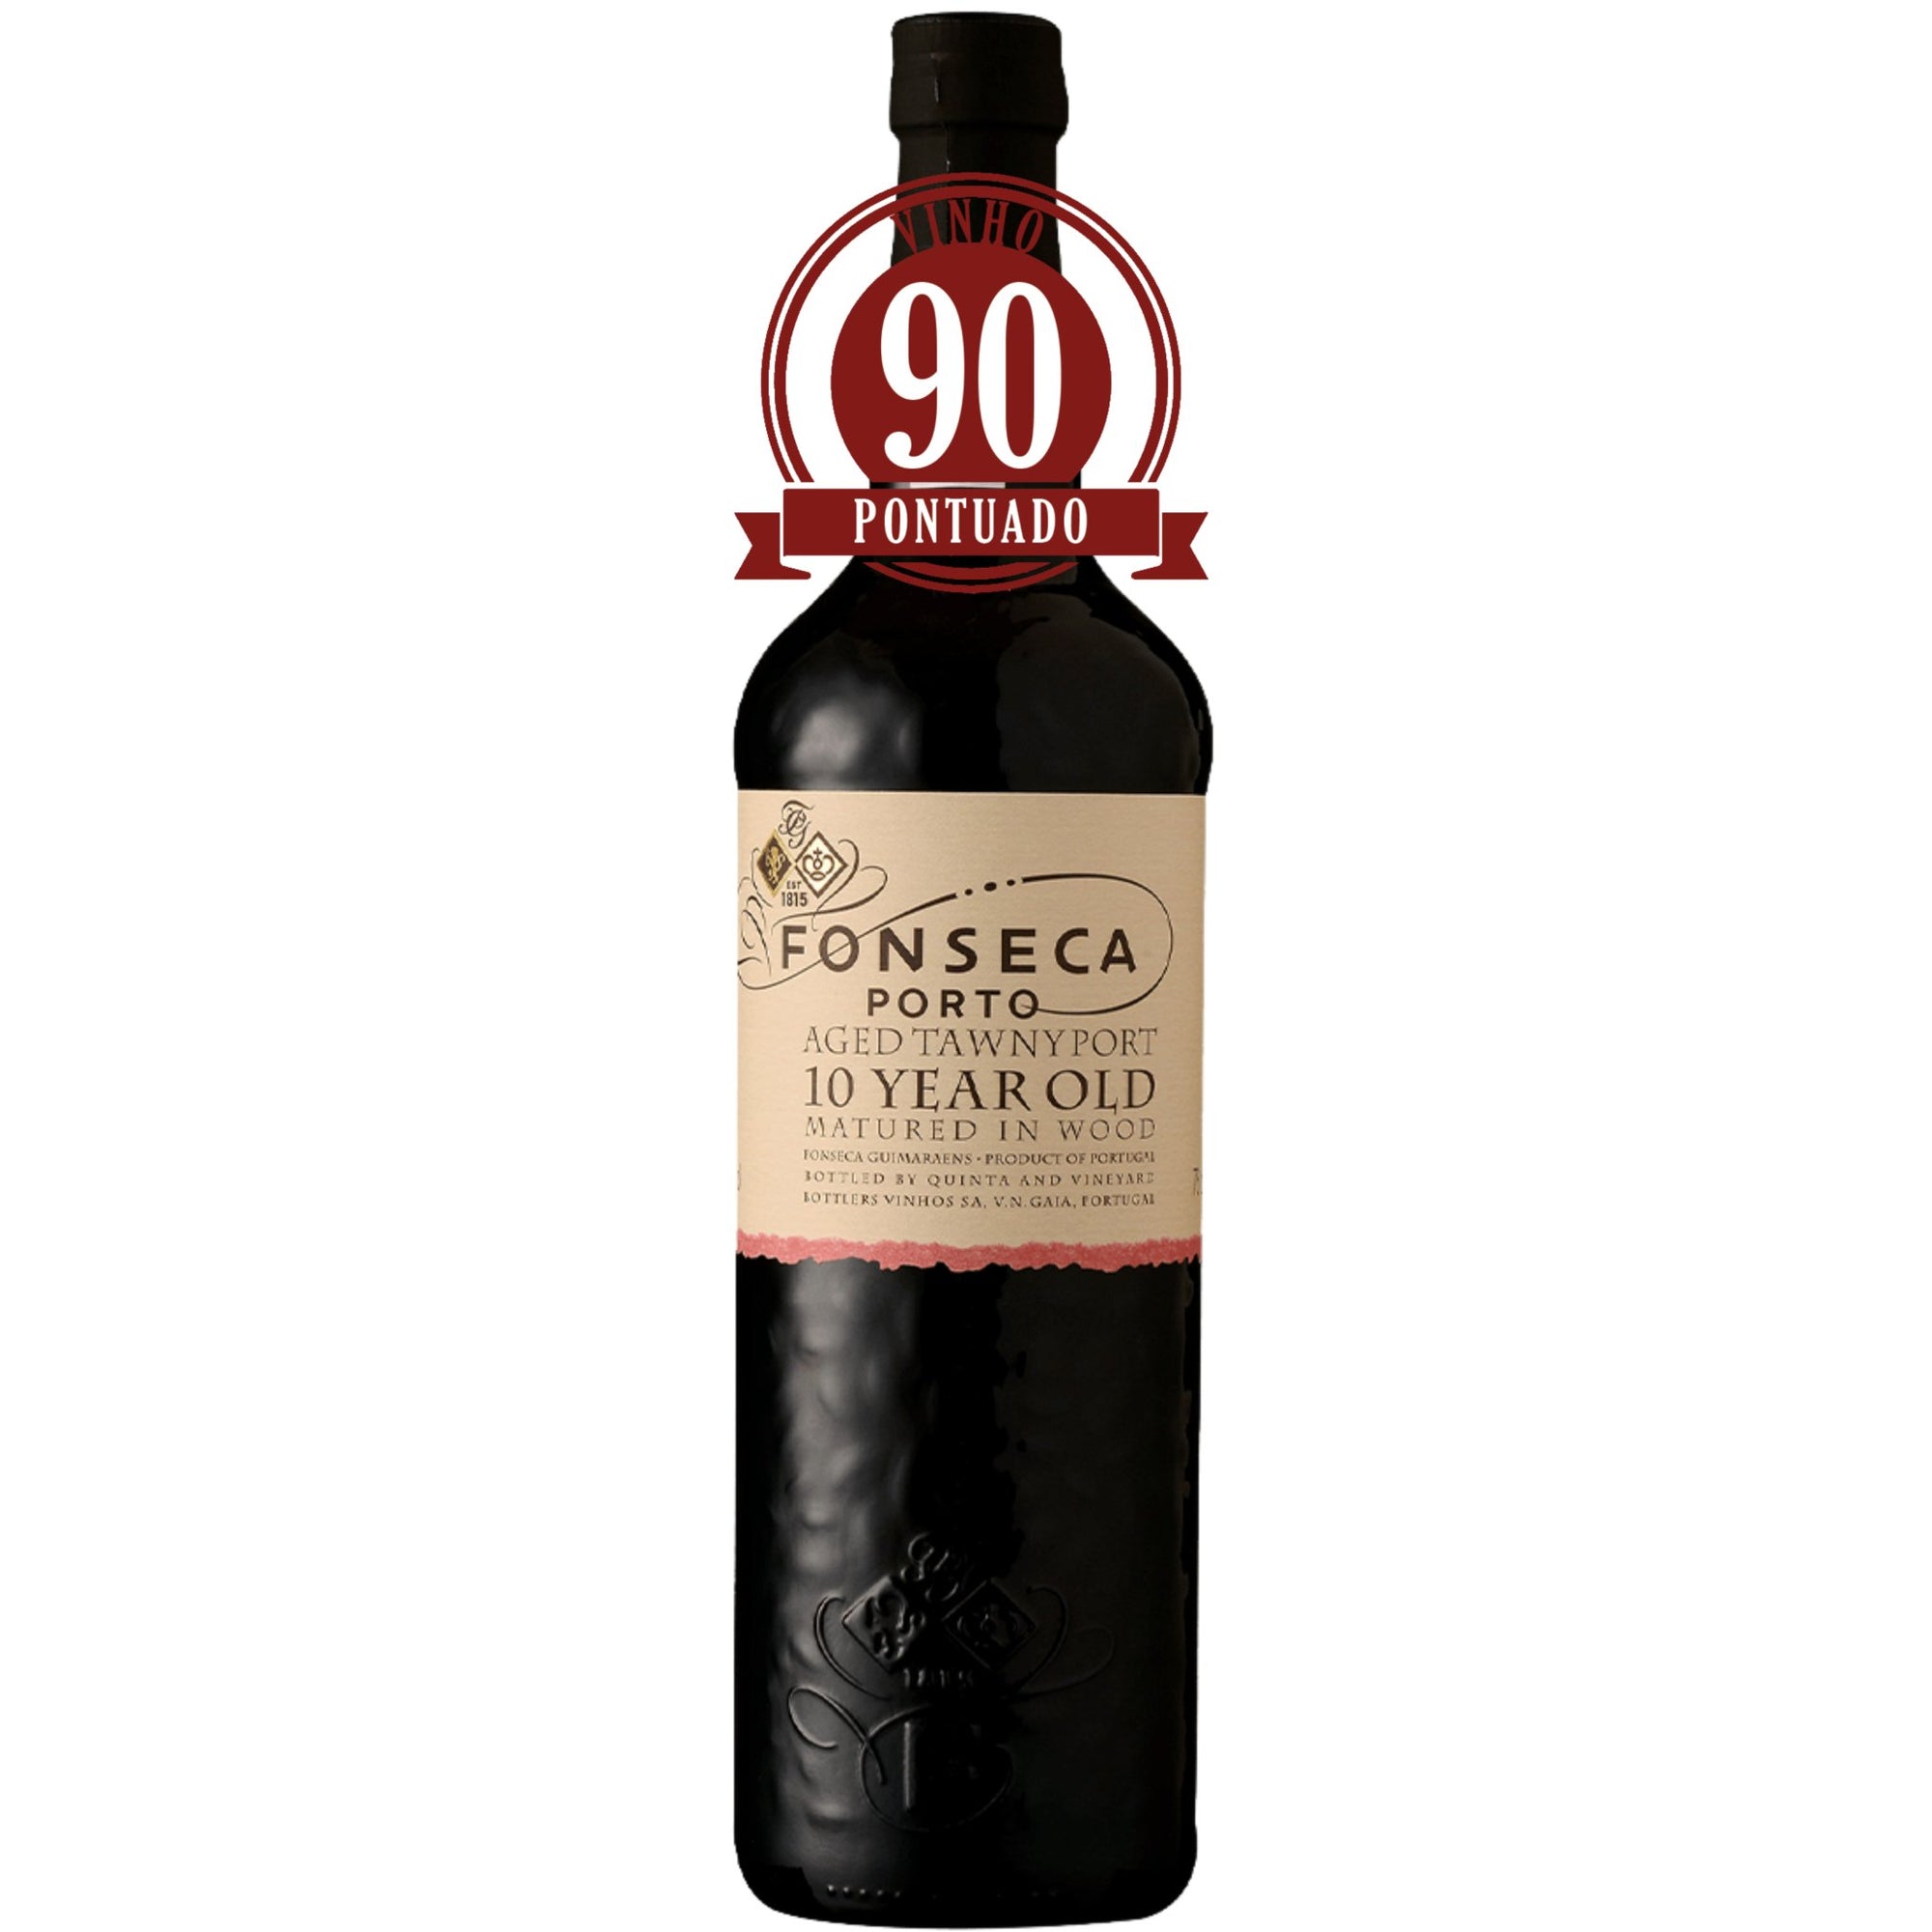 Fonseca Porto Aged Tawny 10 Year Old NV, Portugal - SmartBuyWines.com.br